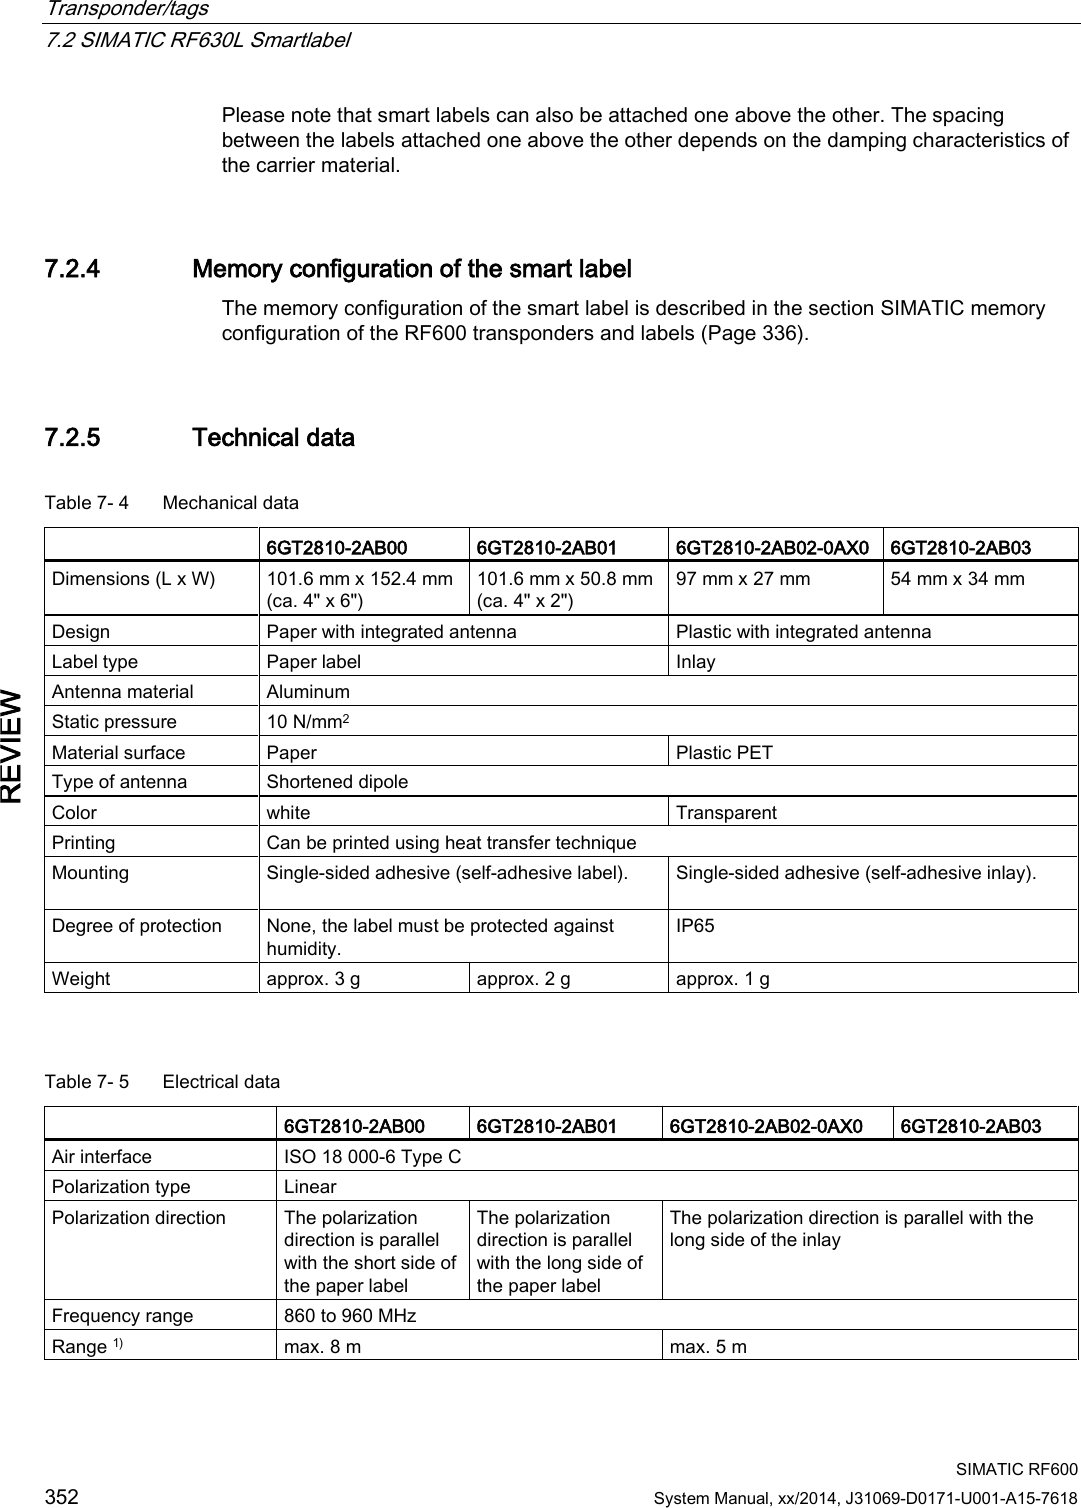 Transponder/tags   7.2 SIMATIC RF630L Smartlabel  SIMATIC RF600 352 System Manual, xx/2014, J31069-D0171-U001-A15-7618 REVIEW Please note that smart labels can also be attached one above the other. The spacing between the labels attached one above the other depends on the damping characteristics of the carrier material. 7.2.4 Memory configuration of the smart label The memory configuration of the smart label is described in the section SIMATIC memory configuration of the RF600 transponders and labels (Page 336). 7.2.5 Technical data Table 7- 4  Mechanical data  6GT2810-2AB00 6GT2810-2AB01 6GT2810-2AB02-0AX0 6GT2810-2AB03 Dimensions (L x W) 101.6 mm x 152.4 mm (ca. 4&quot; x 6&quot;) 101.6 mm x 50.8 mm (ca. 4&quot; x 2&quot;) 97 mm x 27 mm 54 mm x 34 mm Design Paper with integrated antenna Plastic with integrated antenna Label type Paper label Inlay Antenna material Aluminum Static pressure 10 N/mm2 Material surface Paper Plastic PET Type of antenna Shortened dipole  Color white Transparent Printing Can be printed using heat transfer technique Mounting Single-sided adhesive (self-adhesive label).  Single-sided adhesive (self-adhesive inlay). Degree of protection None, the label must be protected against humidity. IP65 Weight approx. 3 g approx. 2 g approx. 1 g  Table 7- 5  Electrical data  6GT2810-2AB00 6GT2810-2AB01 6GT2810-2AB02-0AX0 6GT2810-2AB03 Air interface ISO 18 000-6 Type C Polarization type Linear Polarization direction The polarization direction is parallel with the short side of the paper label The polarization direction is parallel with the long side of the paper label The polarization direction is parallel with the long side of the inlay Frequency range 860 to 960 MHz Range 1) max. 8 m max. 5 m 